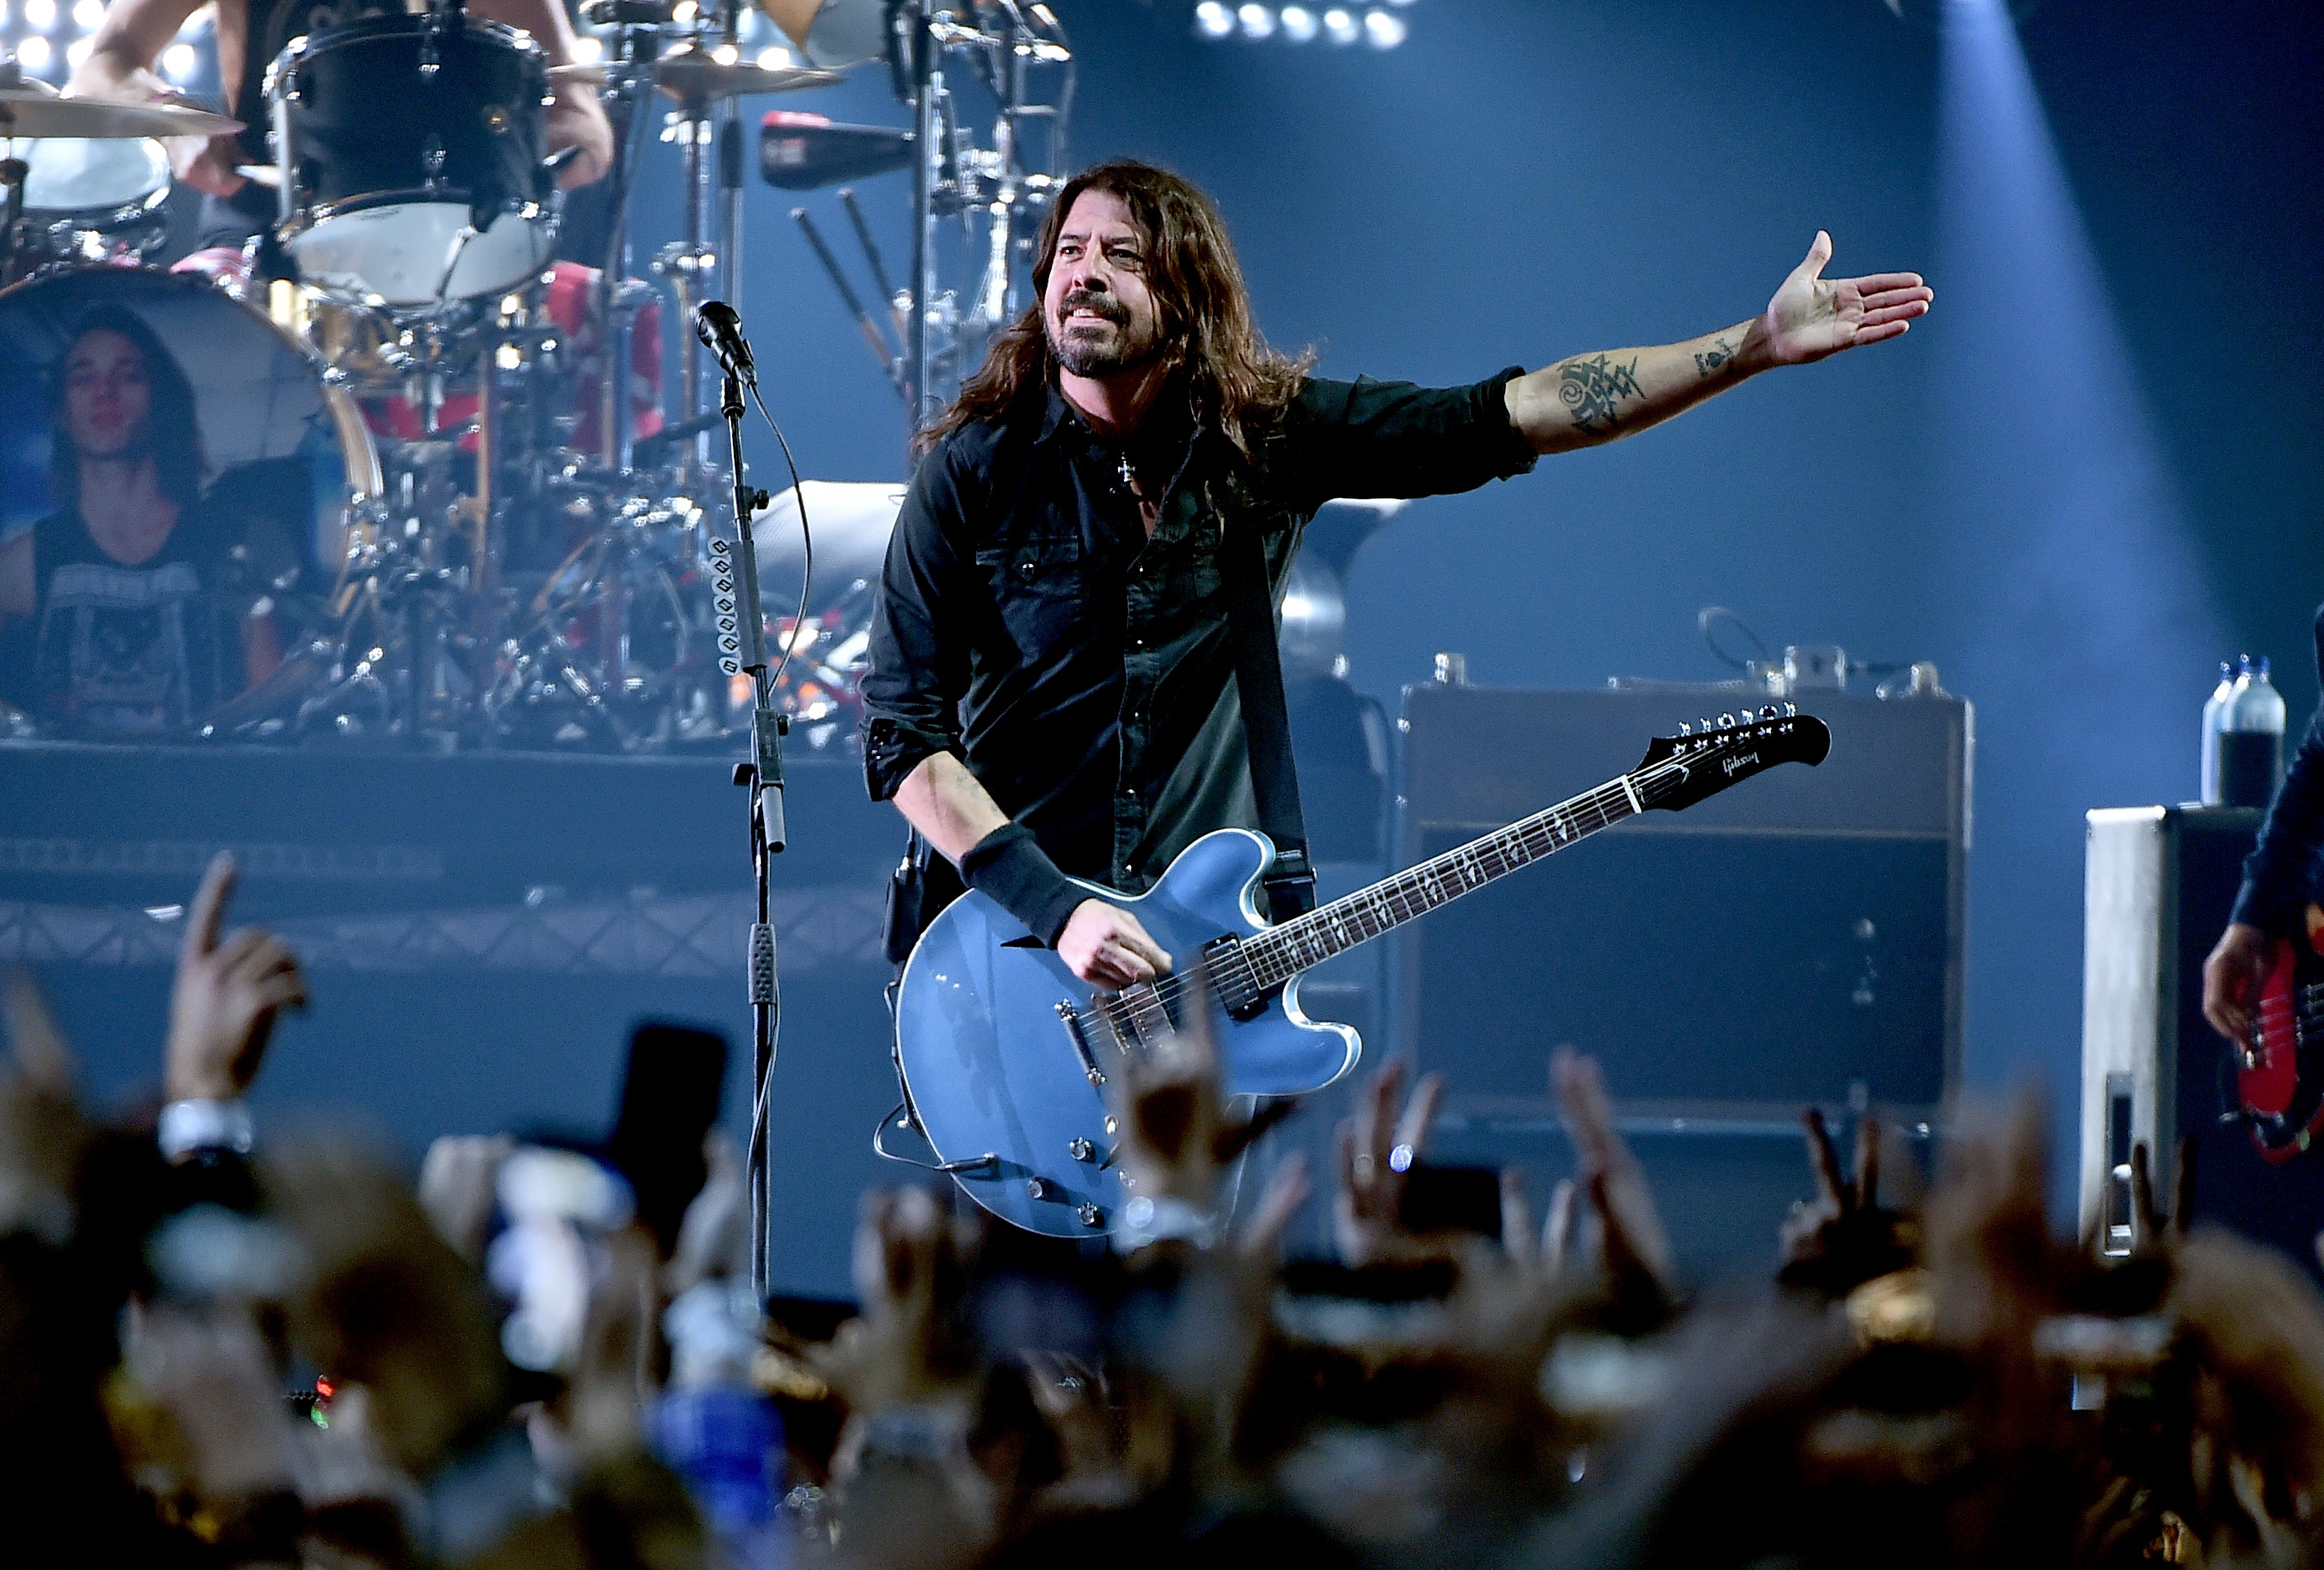 Direct TV Super Bowl Super Saturday Night Foo Fighters Concert Review